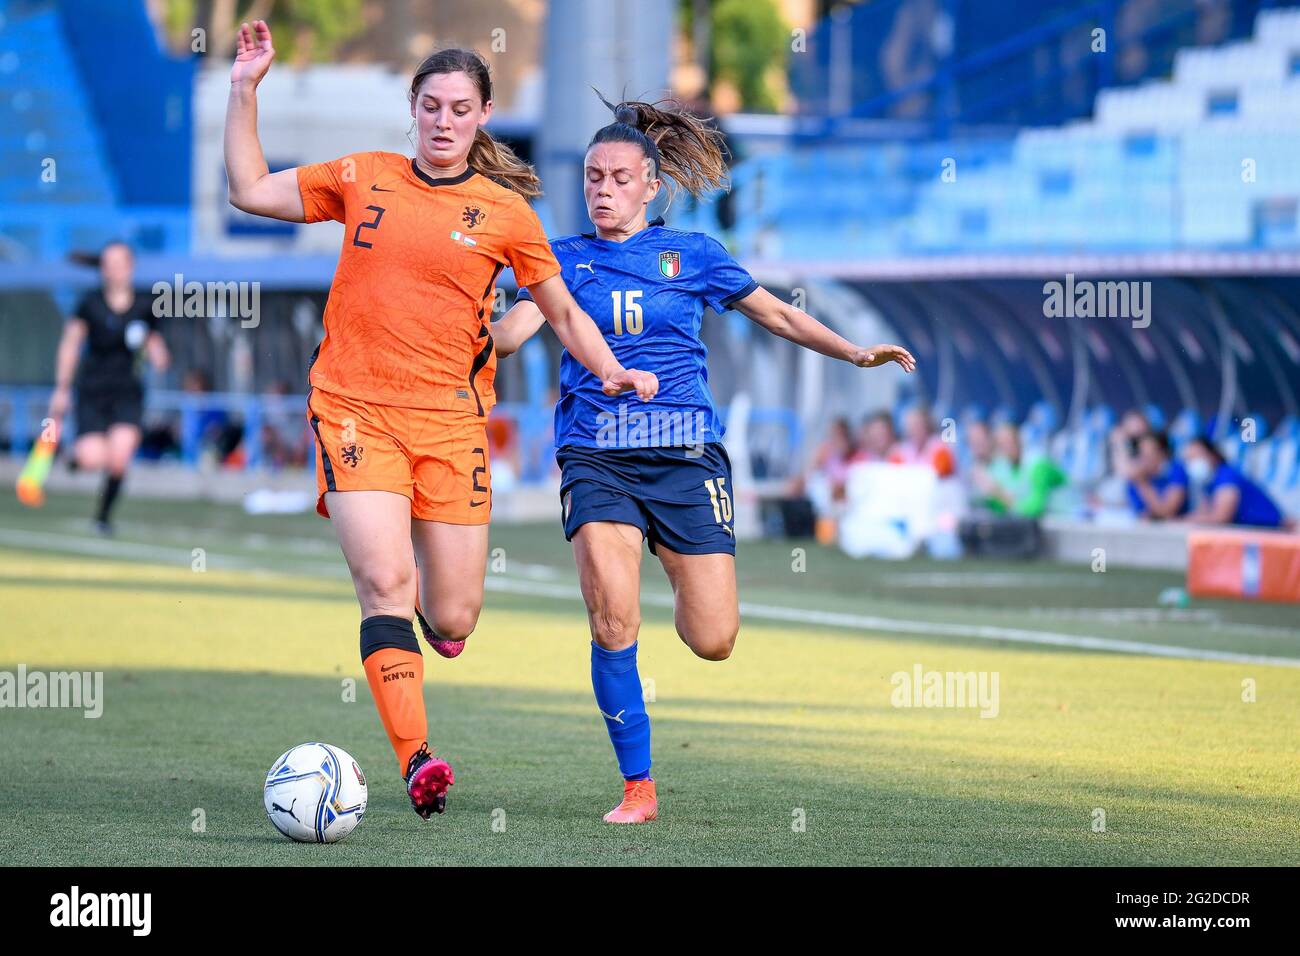 Paolo Mazza stadium, Ferrara, Italy. 10th June, 2021. Aniek Nouwen (PSV) of Netherlands hindered by Annamaria Serturini (Roma) of Italy during Friendly match 2021 - Italy Women vs Netherlands, friendly football match - Photo Ettore Griffoni/LM Credit: Live Media Publishing Group/Alamy Live News Stock Photo